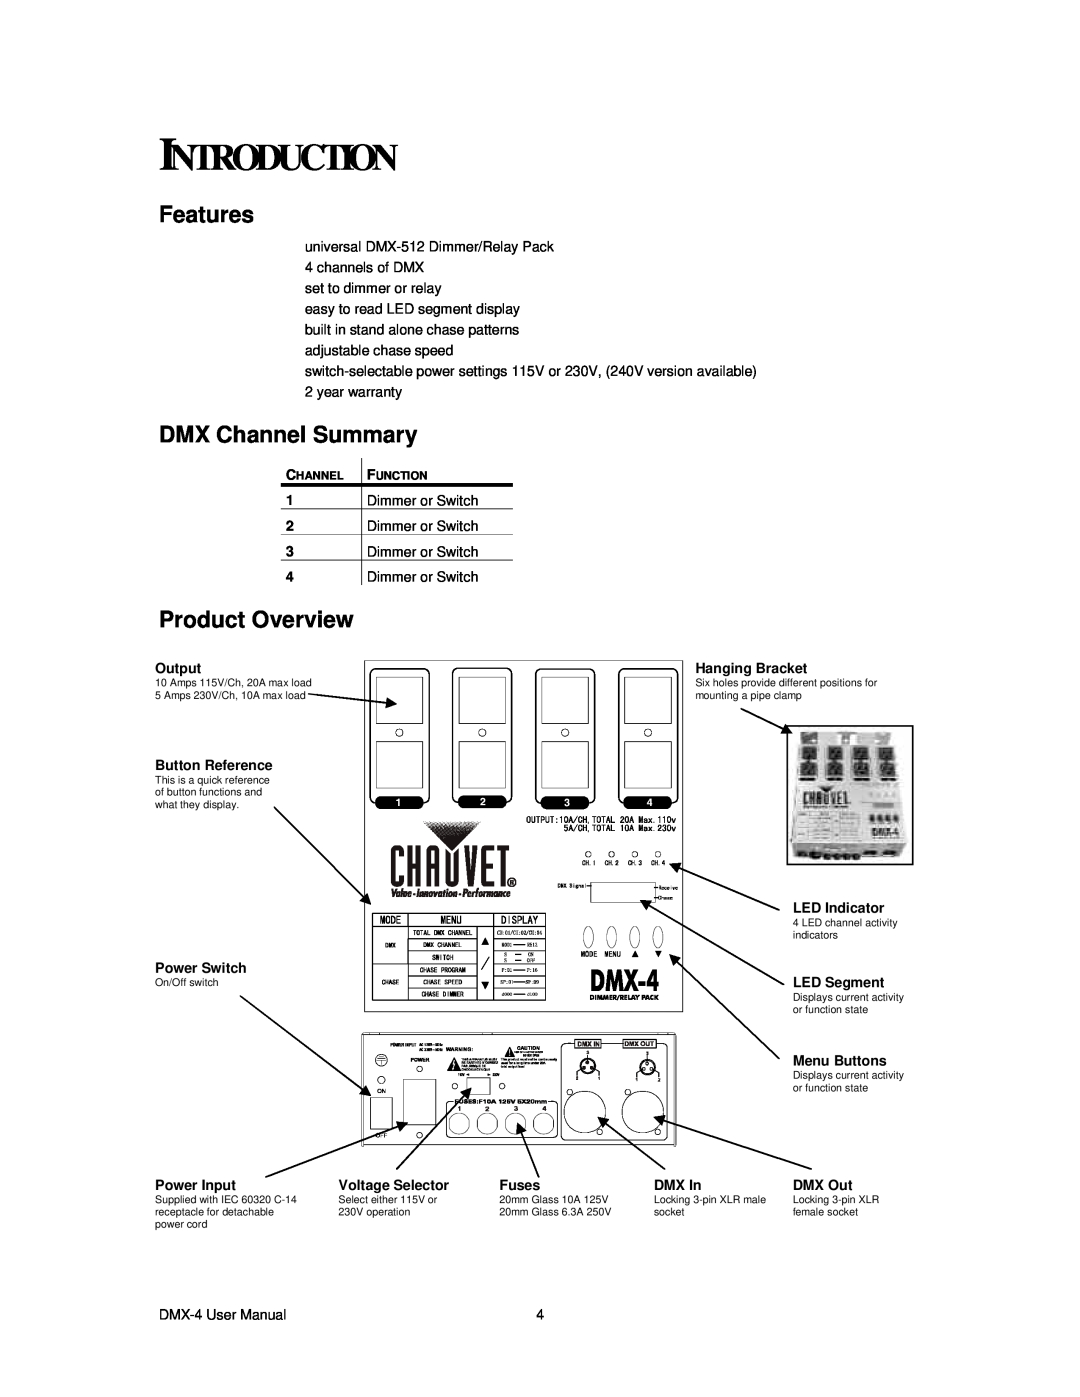 Chauvet DMX-4 user manual Introduction, Features, DMX Channel Summary, Product Overview 